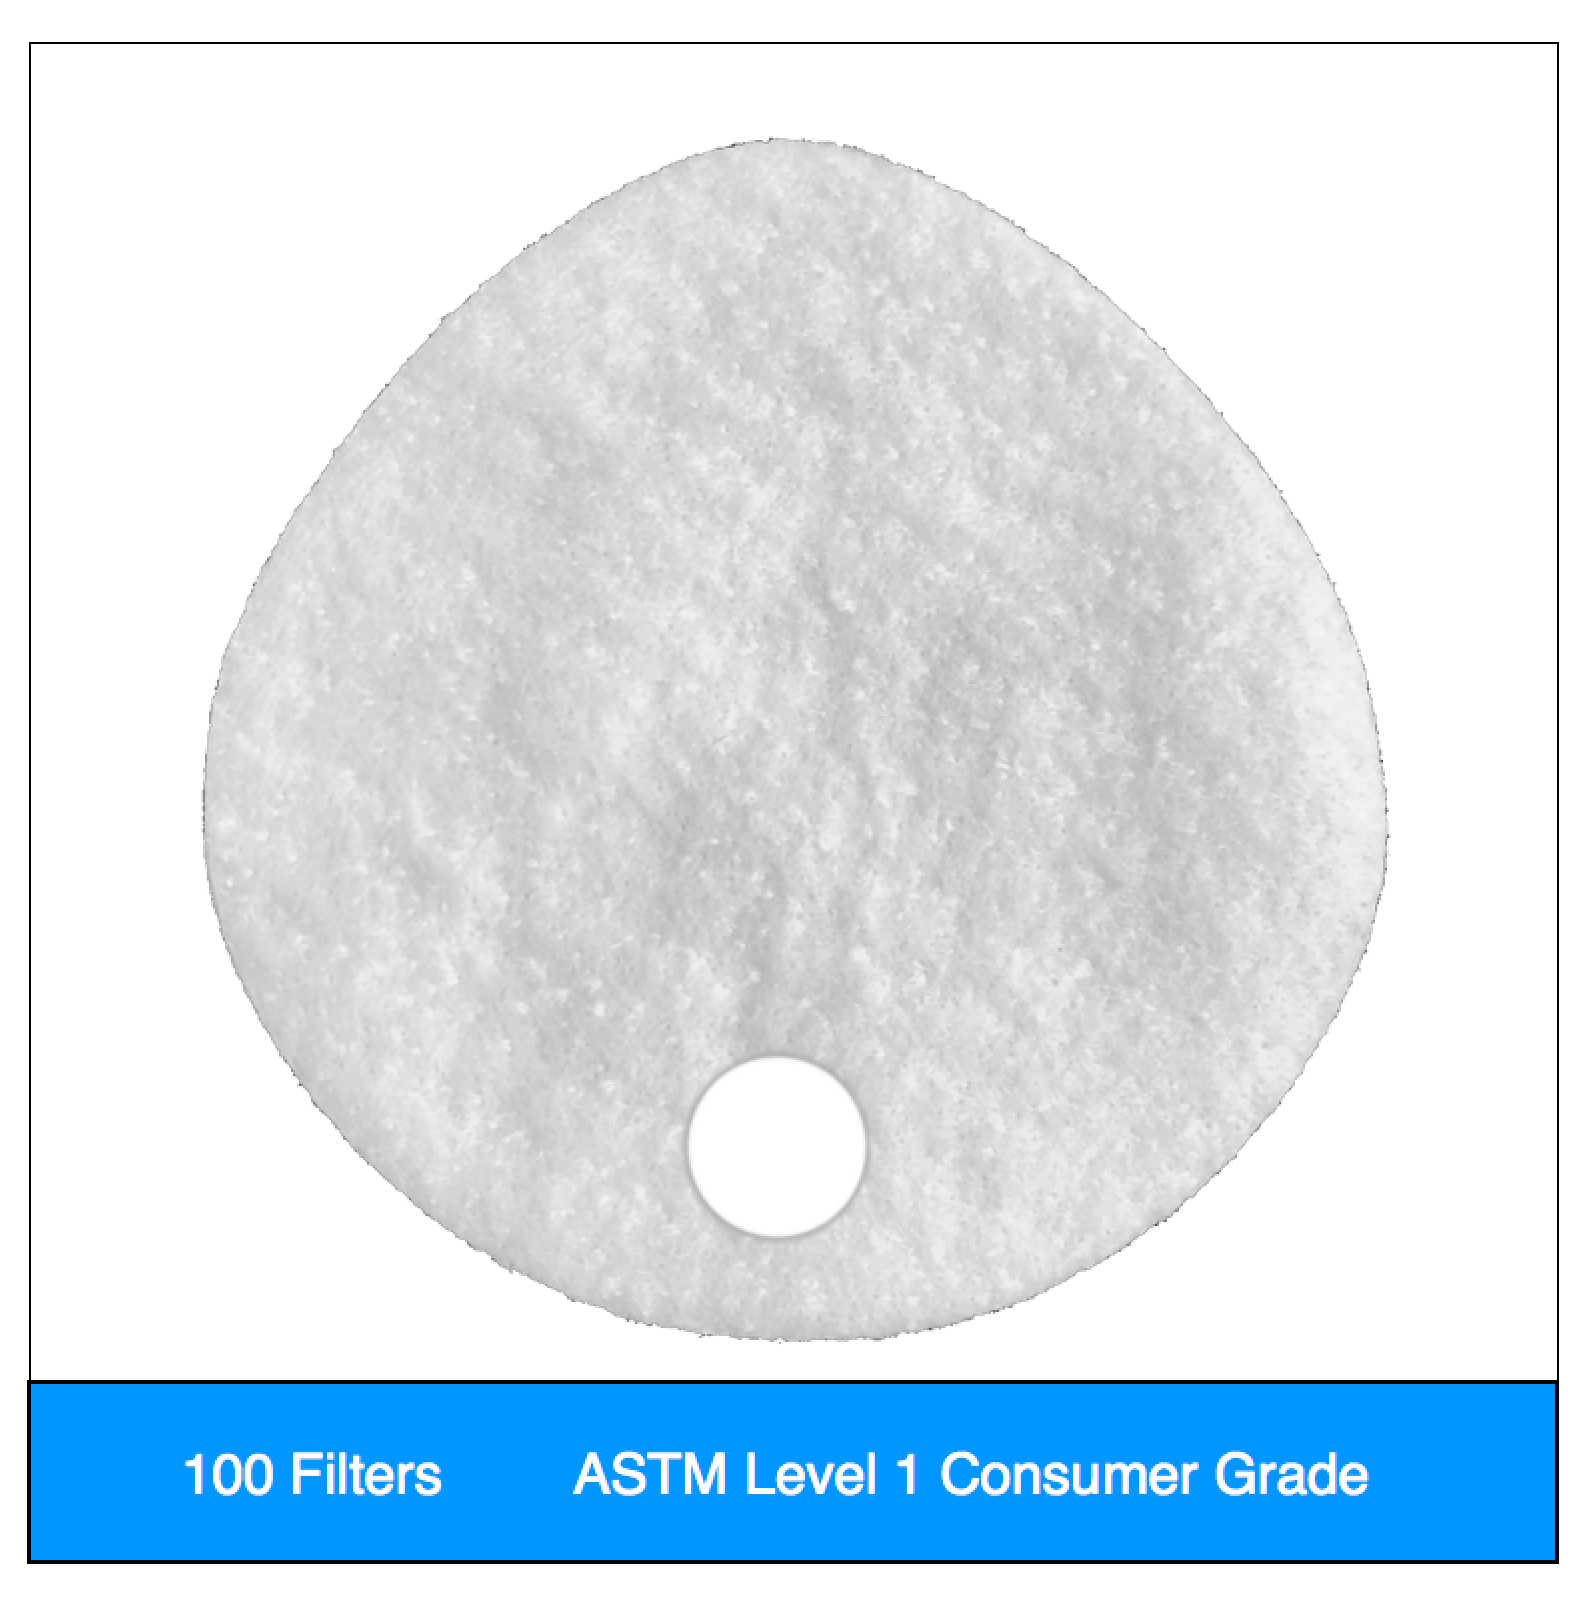 ASTM Level 1 Consumer | Clinical filter Set (100 qty) Valved